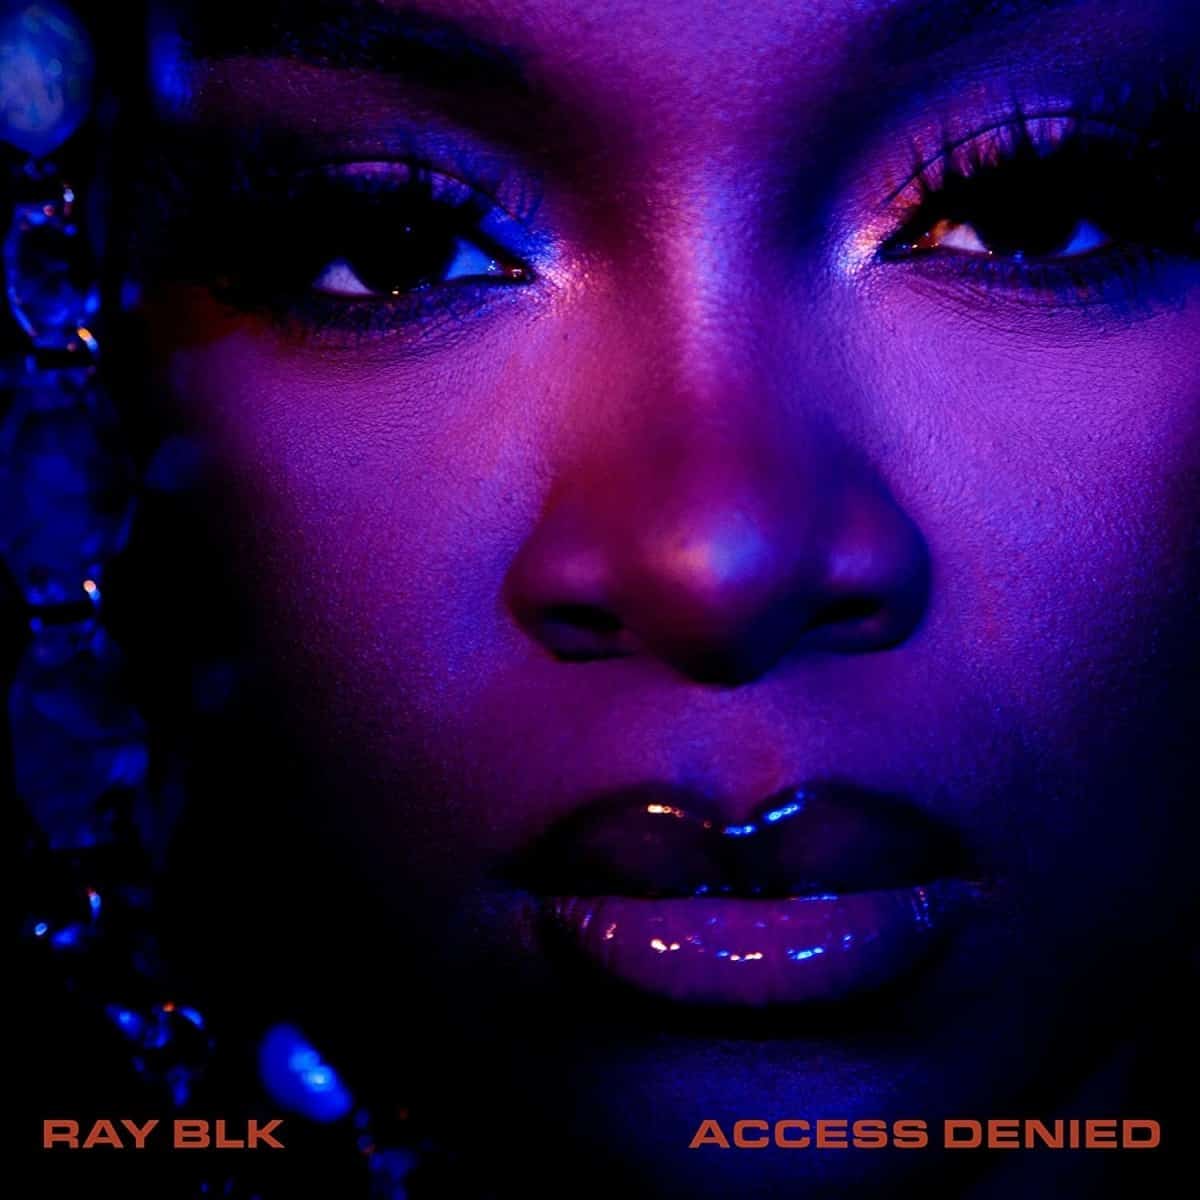 RAY BLK shines on long-awaited debut "Access Denied"